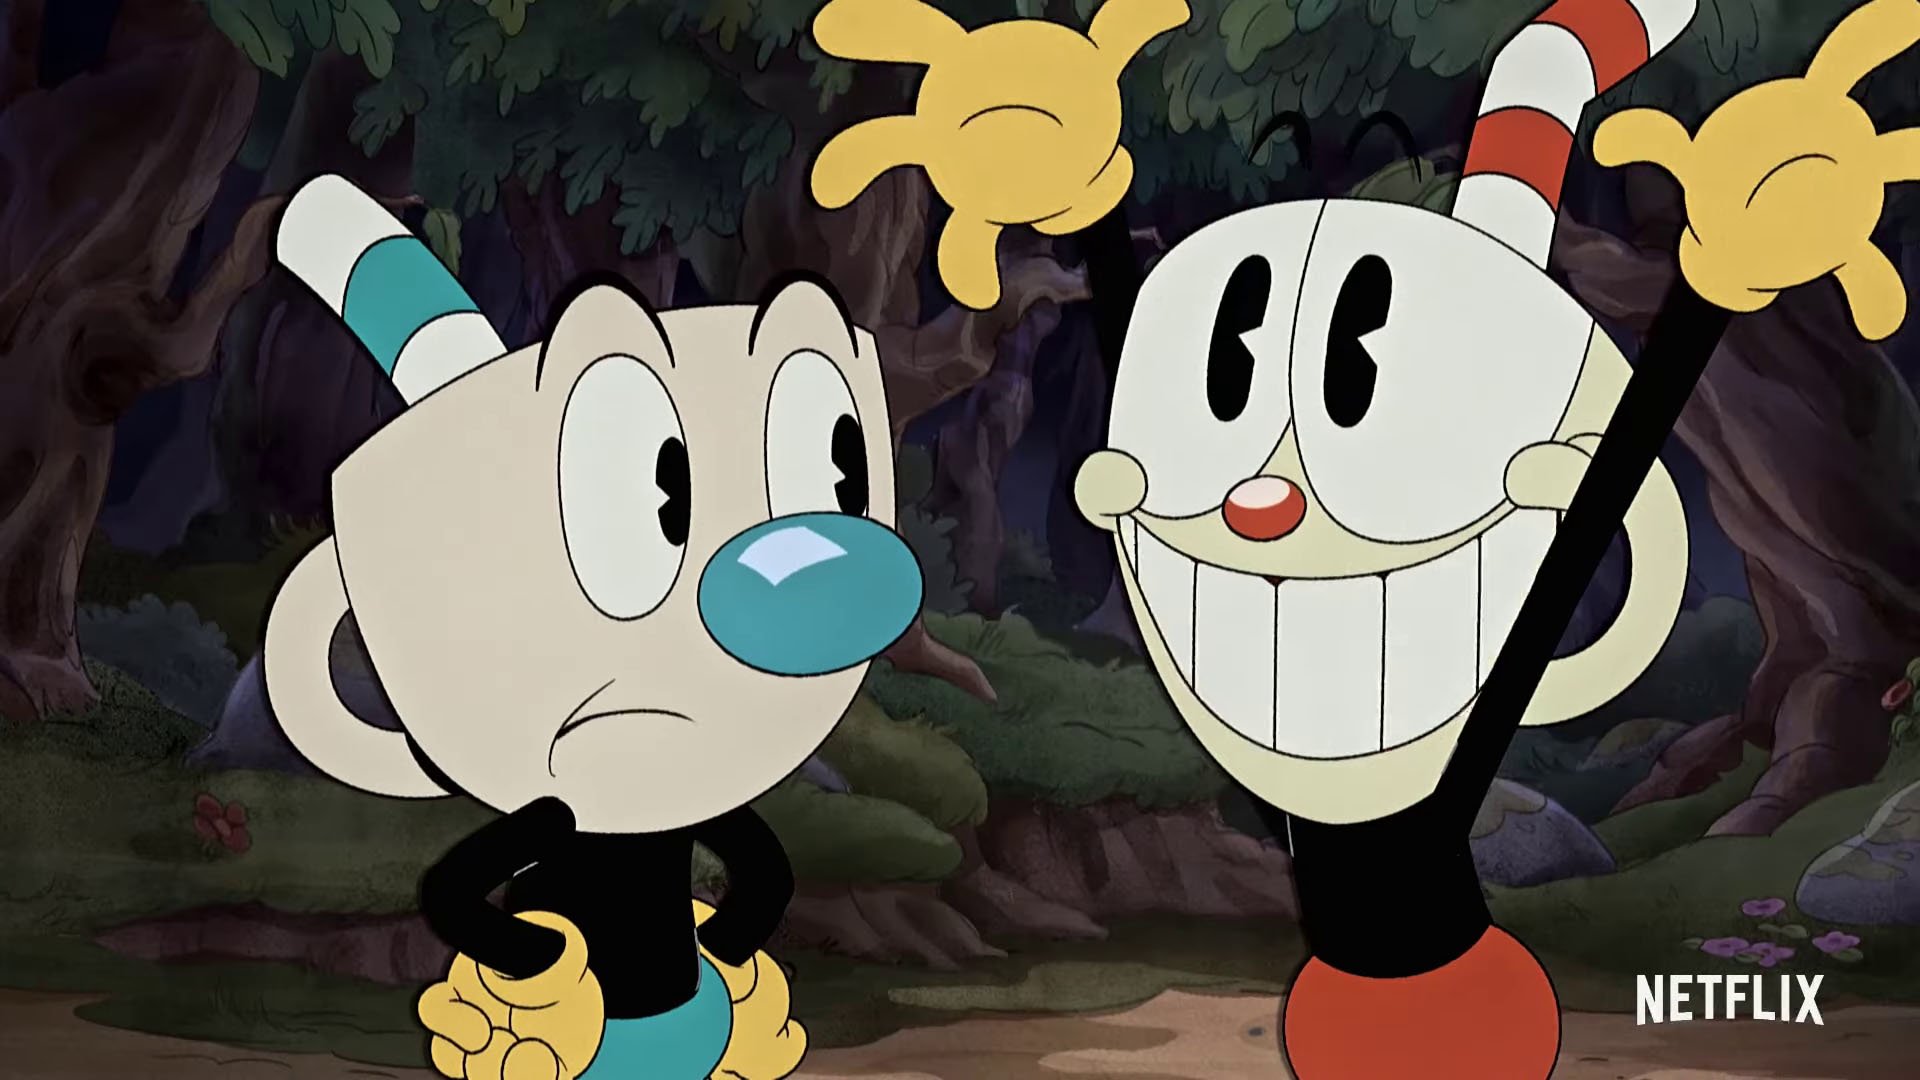 The Cuphead Show season four release date, trailer, and more